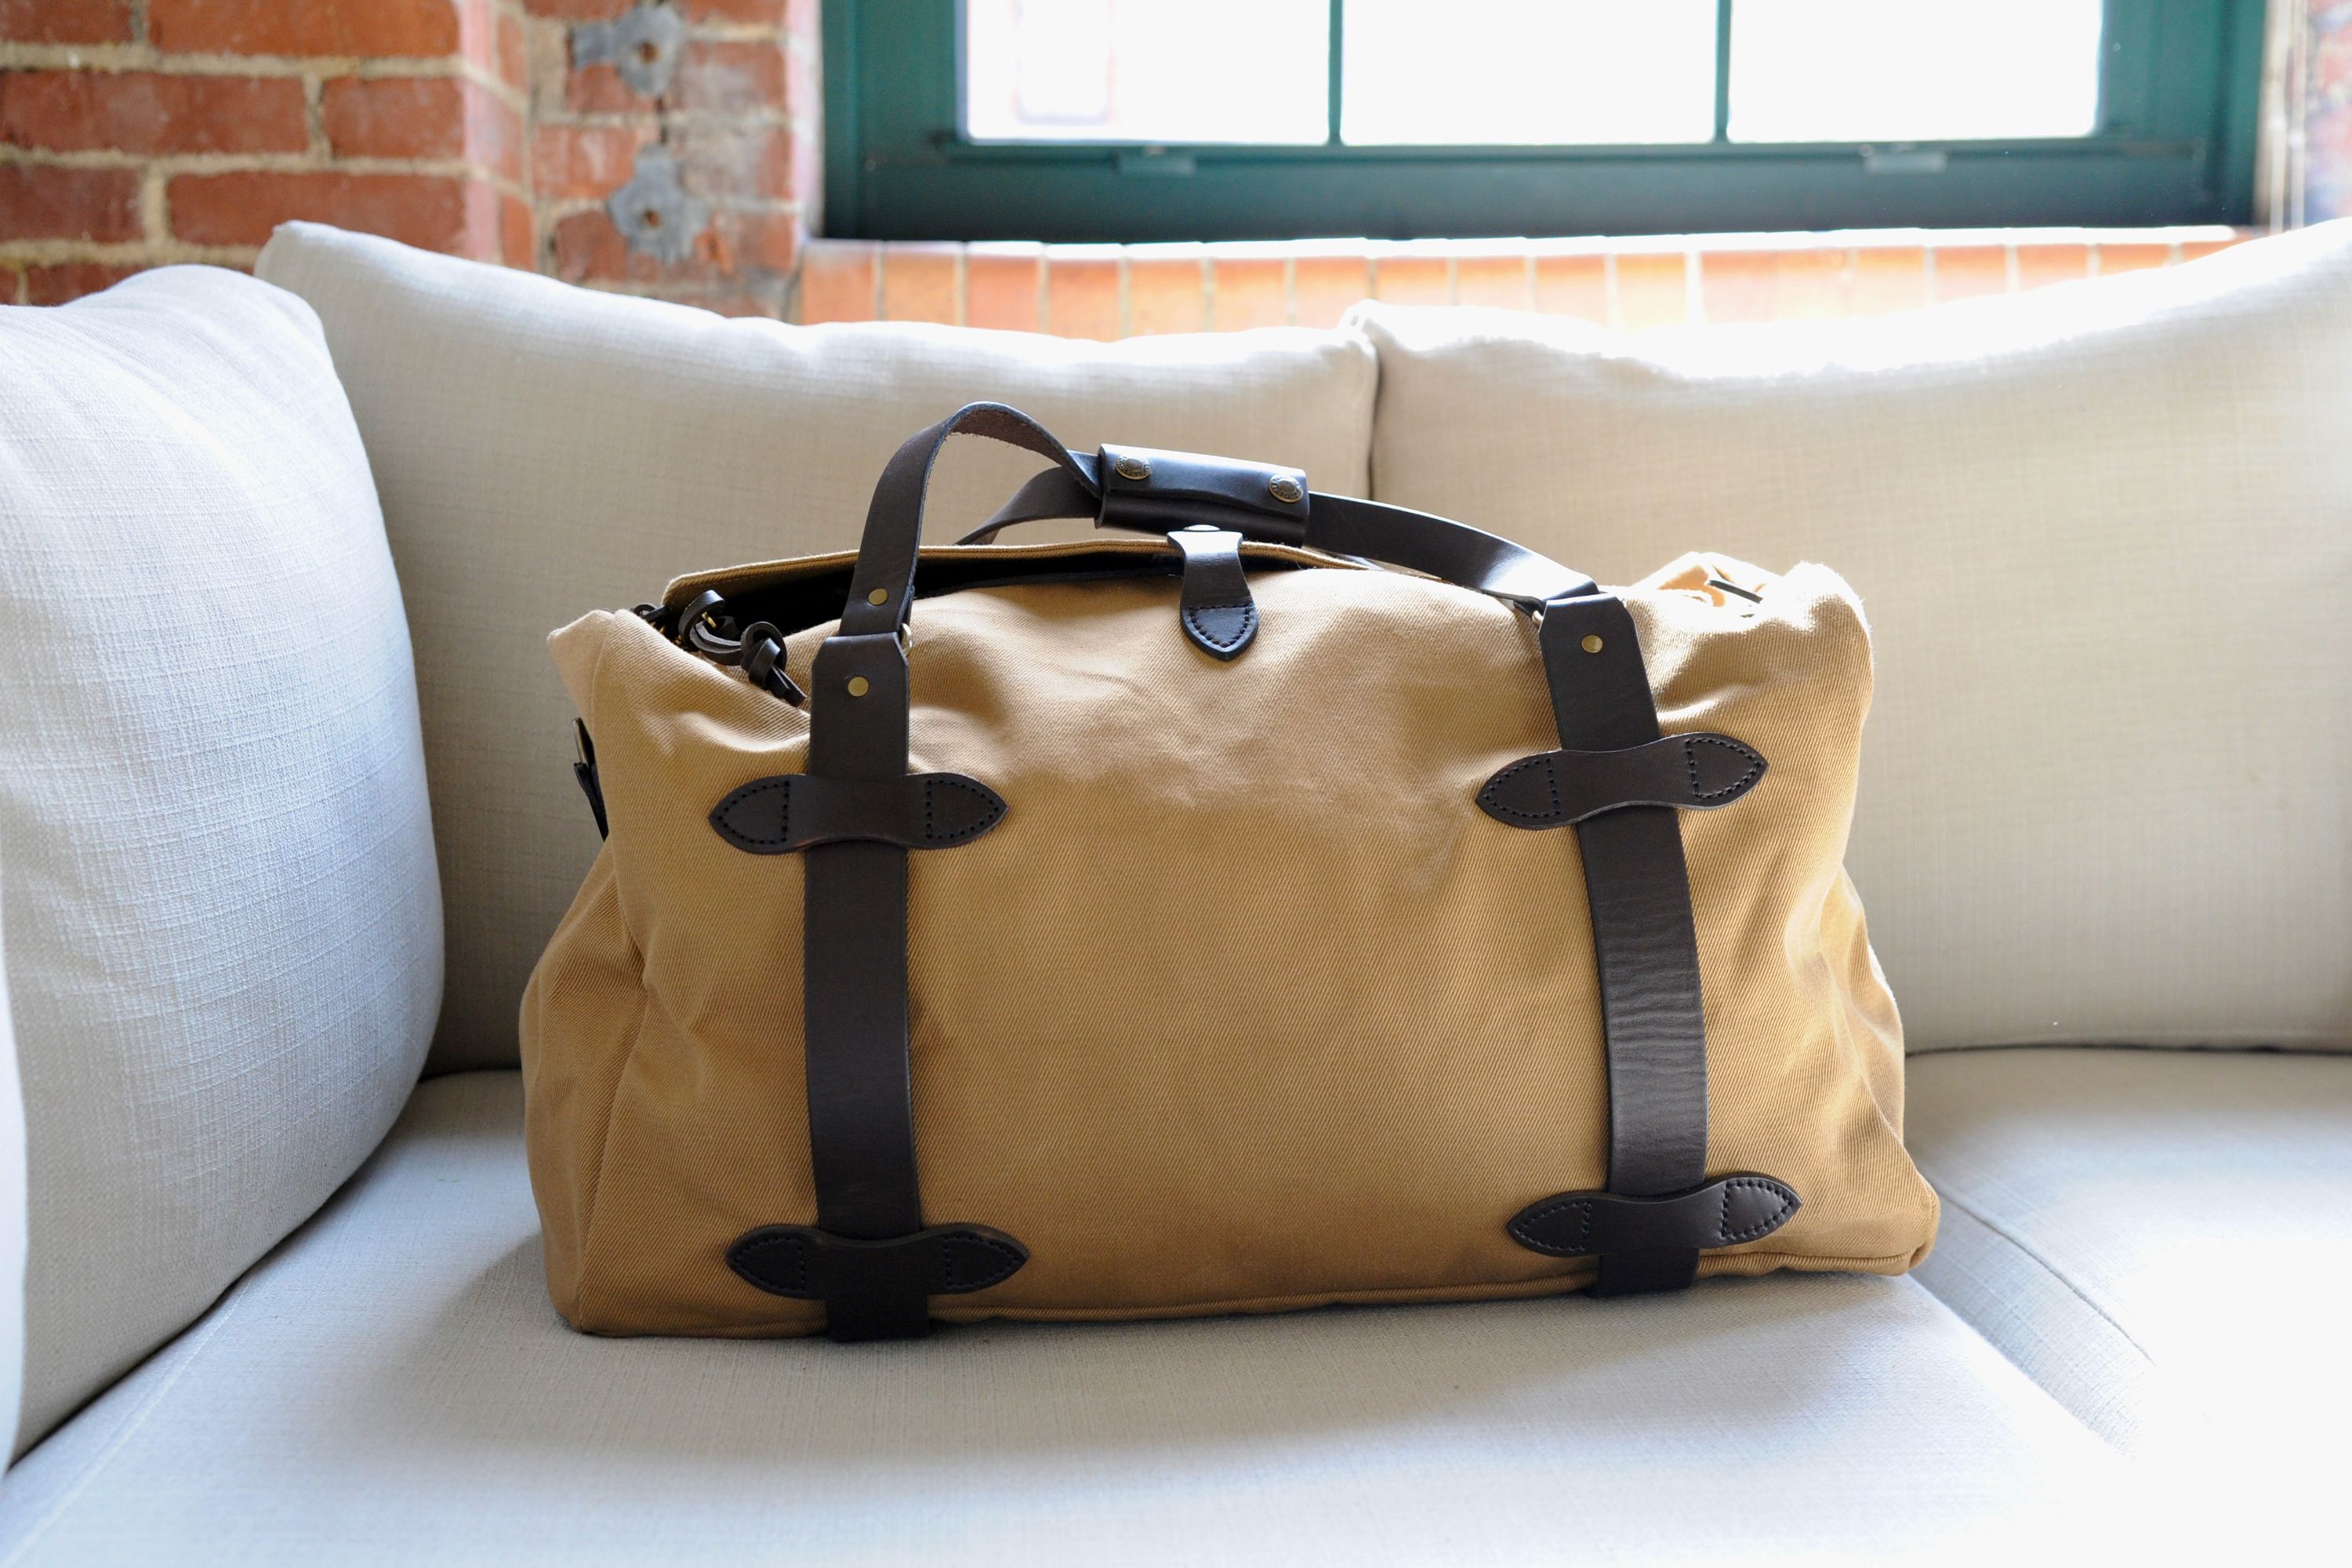 Filson Small Duffle Bag Review: A Simple Bag Built for the Long Haul